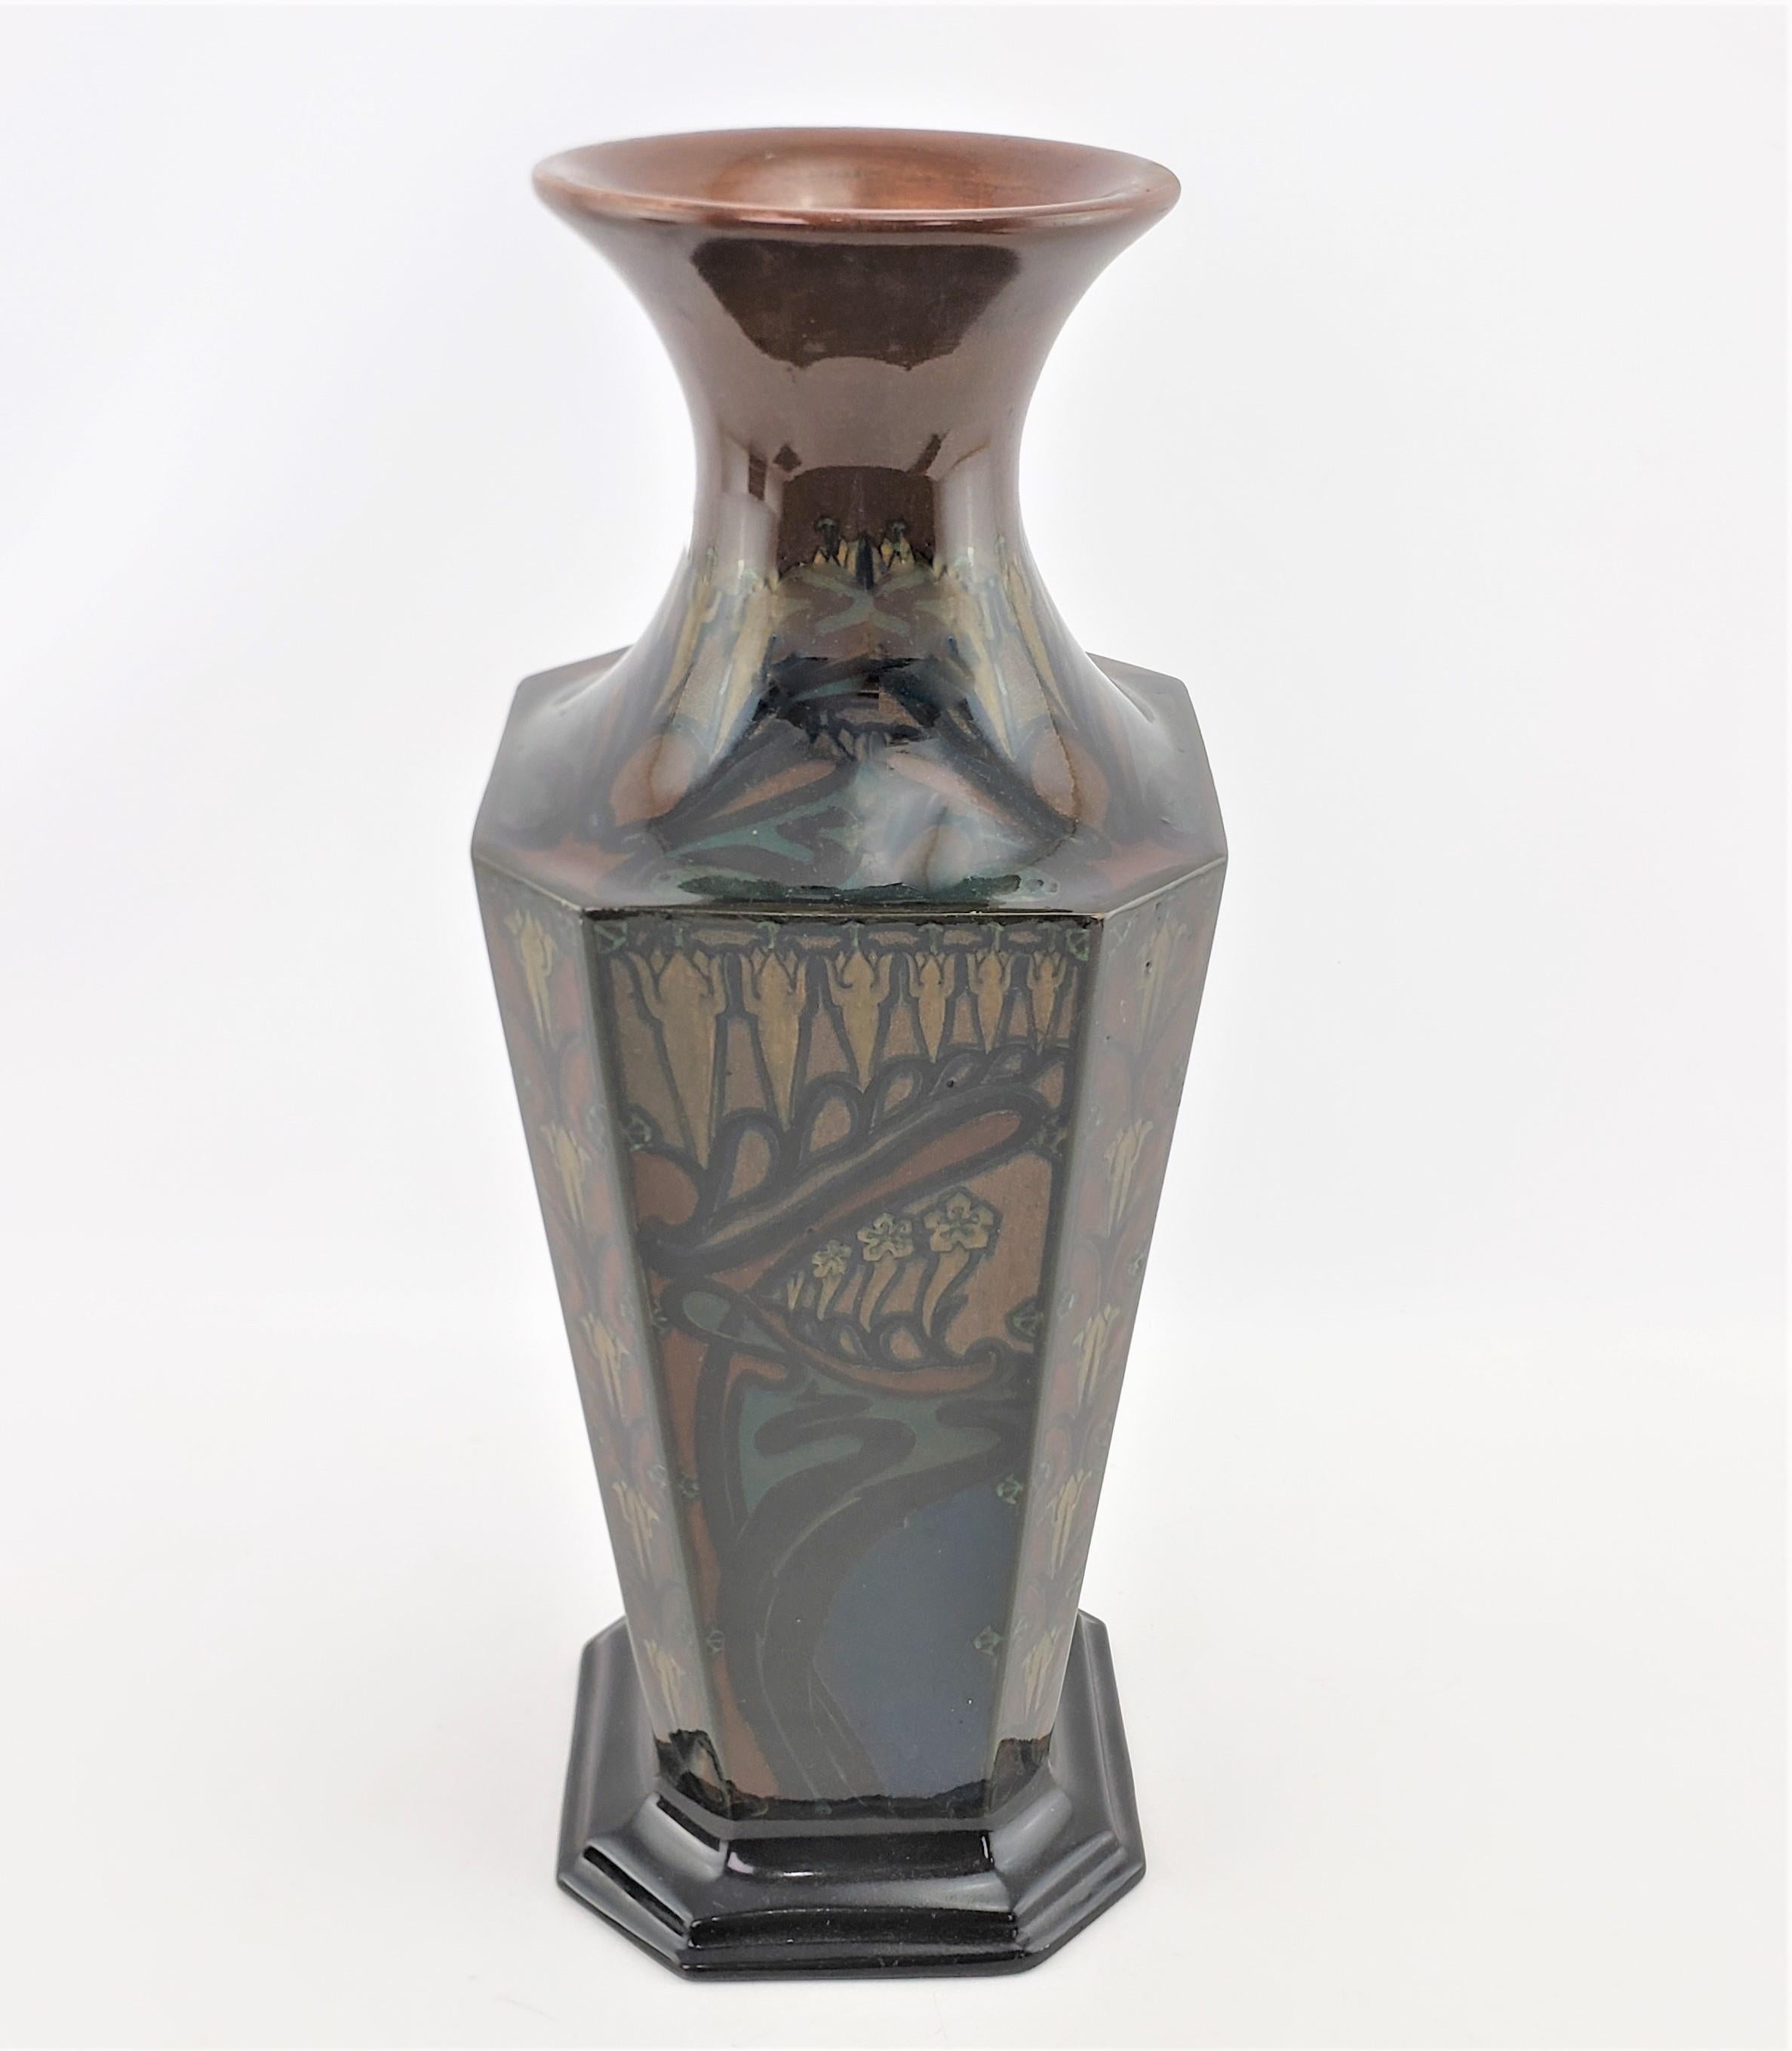 This large and substantial art pottery vase was made by the well known Rozenburg Porcelain factory of Holland in approximately 1900 in an Art Nouveau style. This eight sided vase is made of earthen ware and formed in a tapered eight sided vase